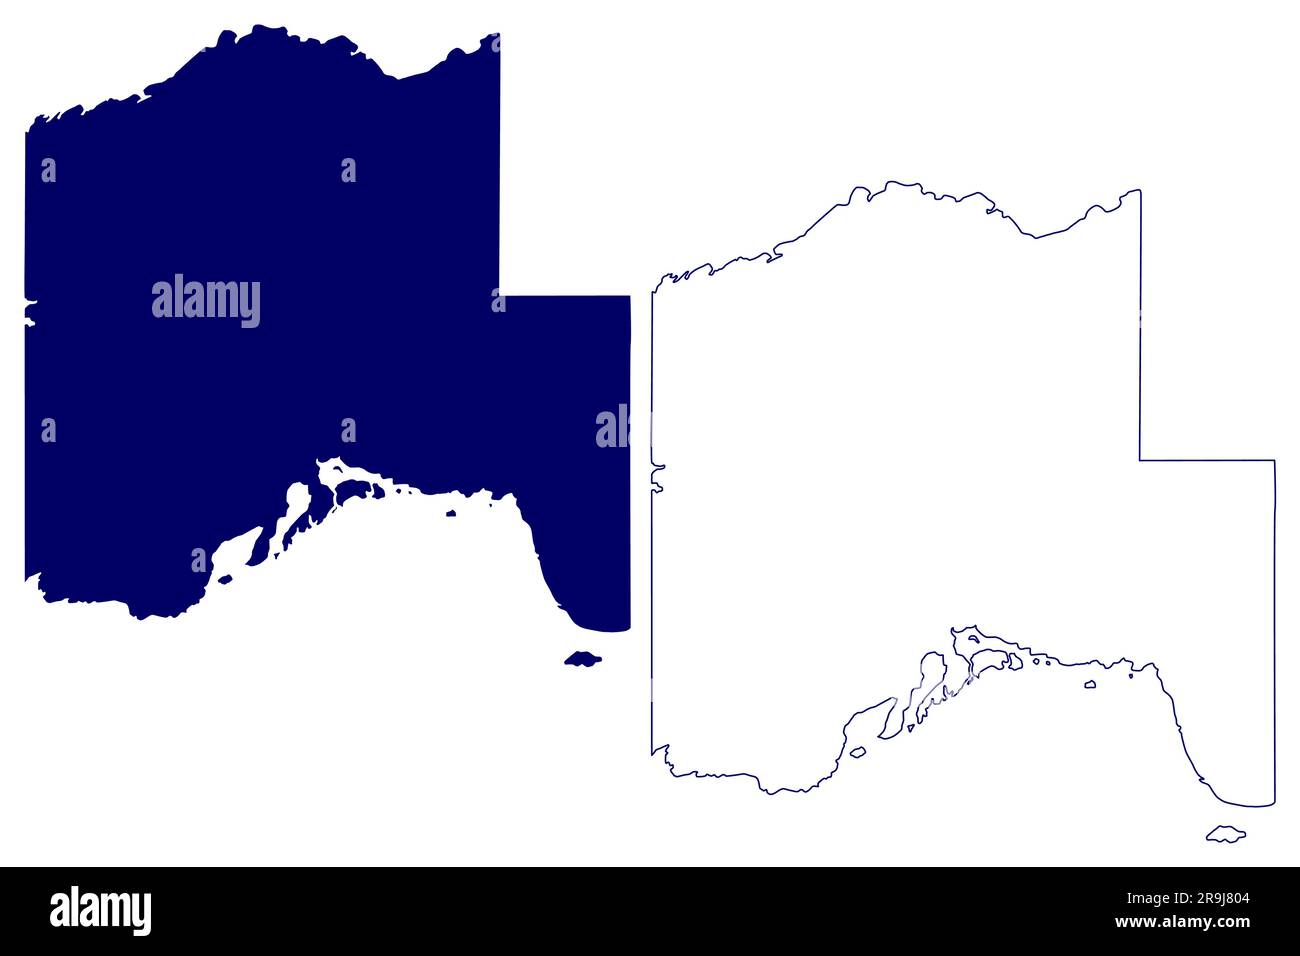 Thunder Bay District (Canada, Ontario Province, North America) map vector illustration, scribble sketch Thunder Bay map Stock Vector